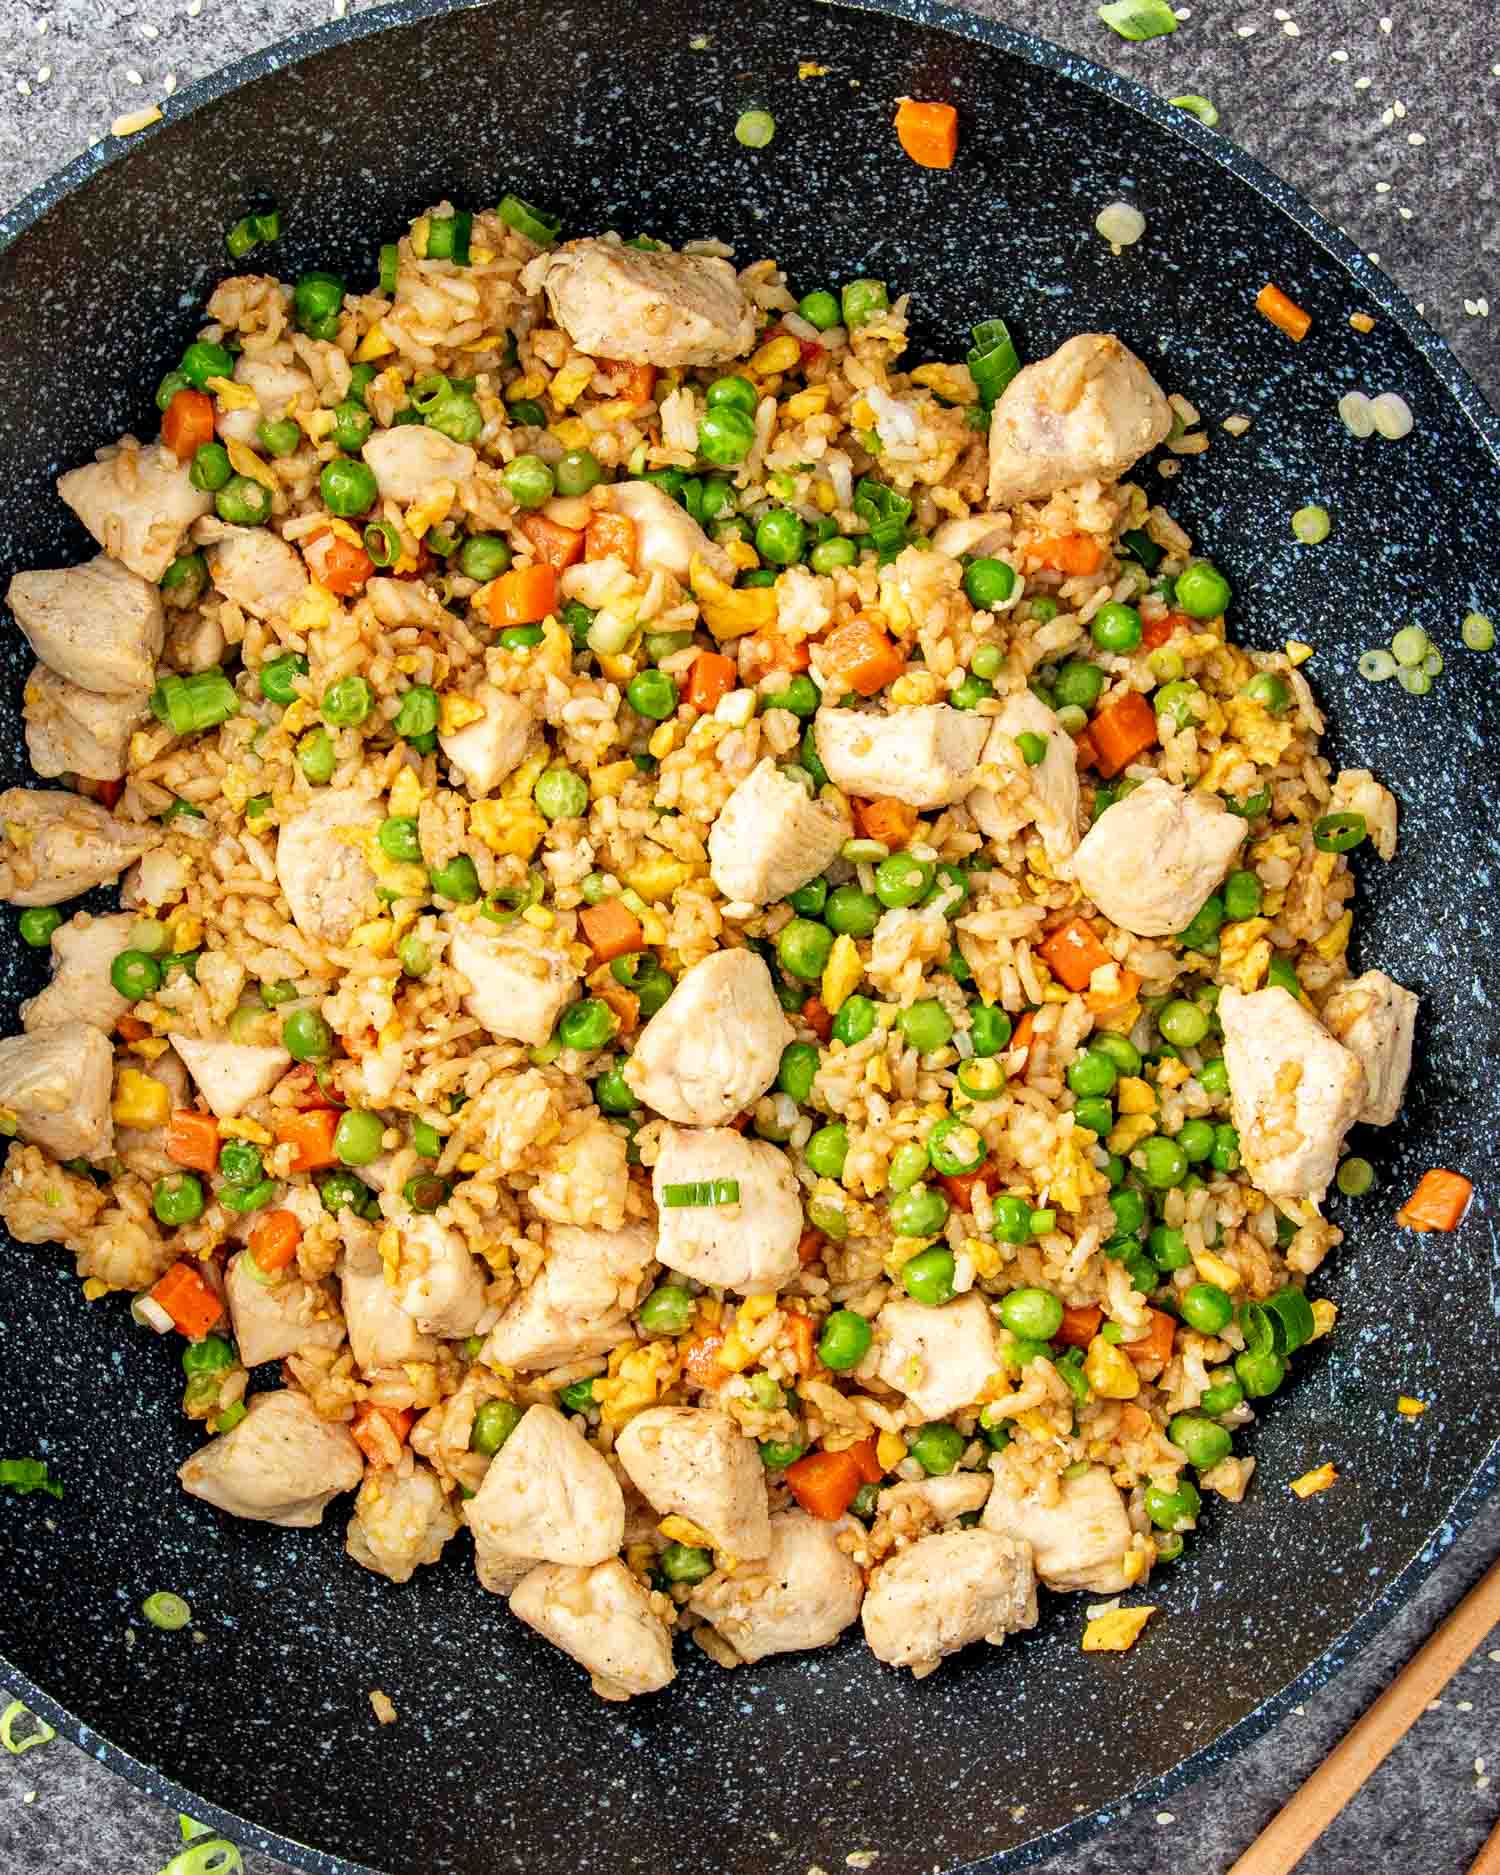 freshly made chicken fried rice in a wok.